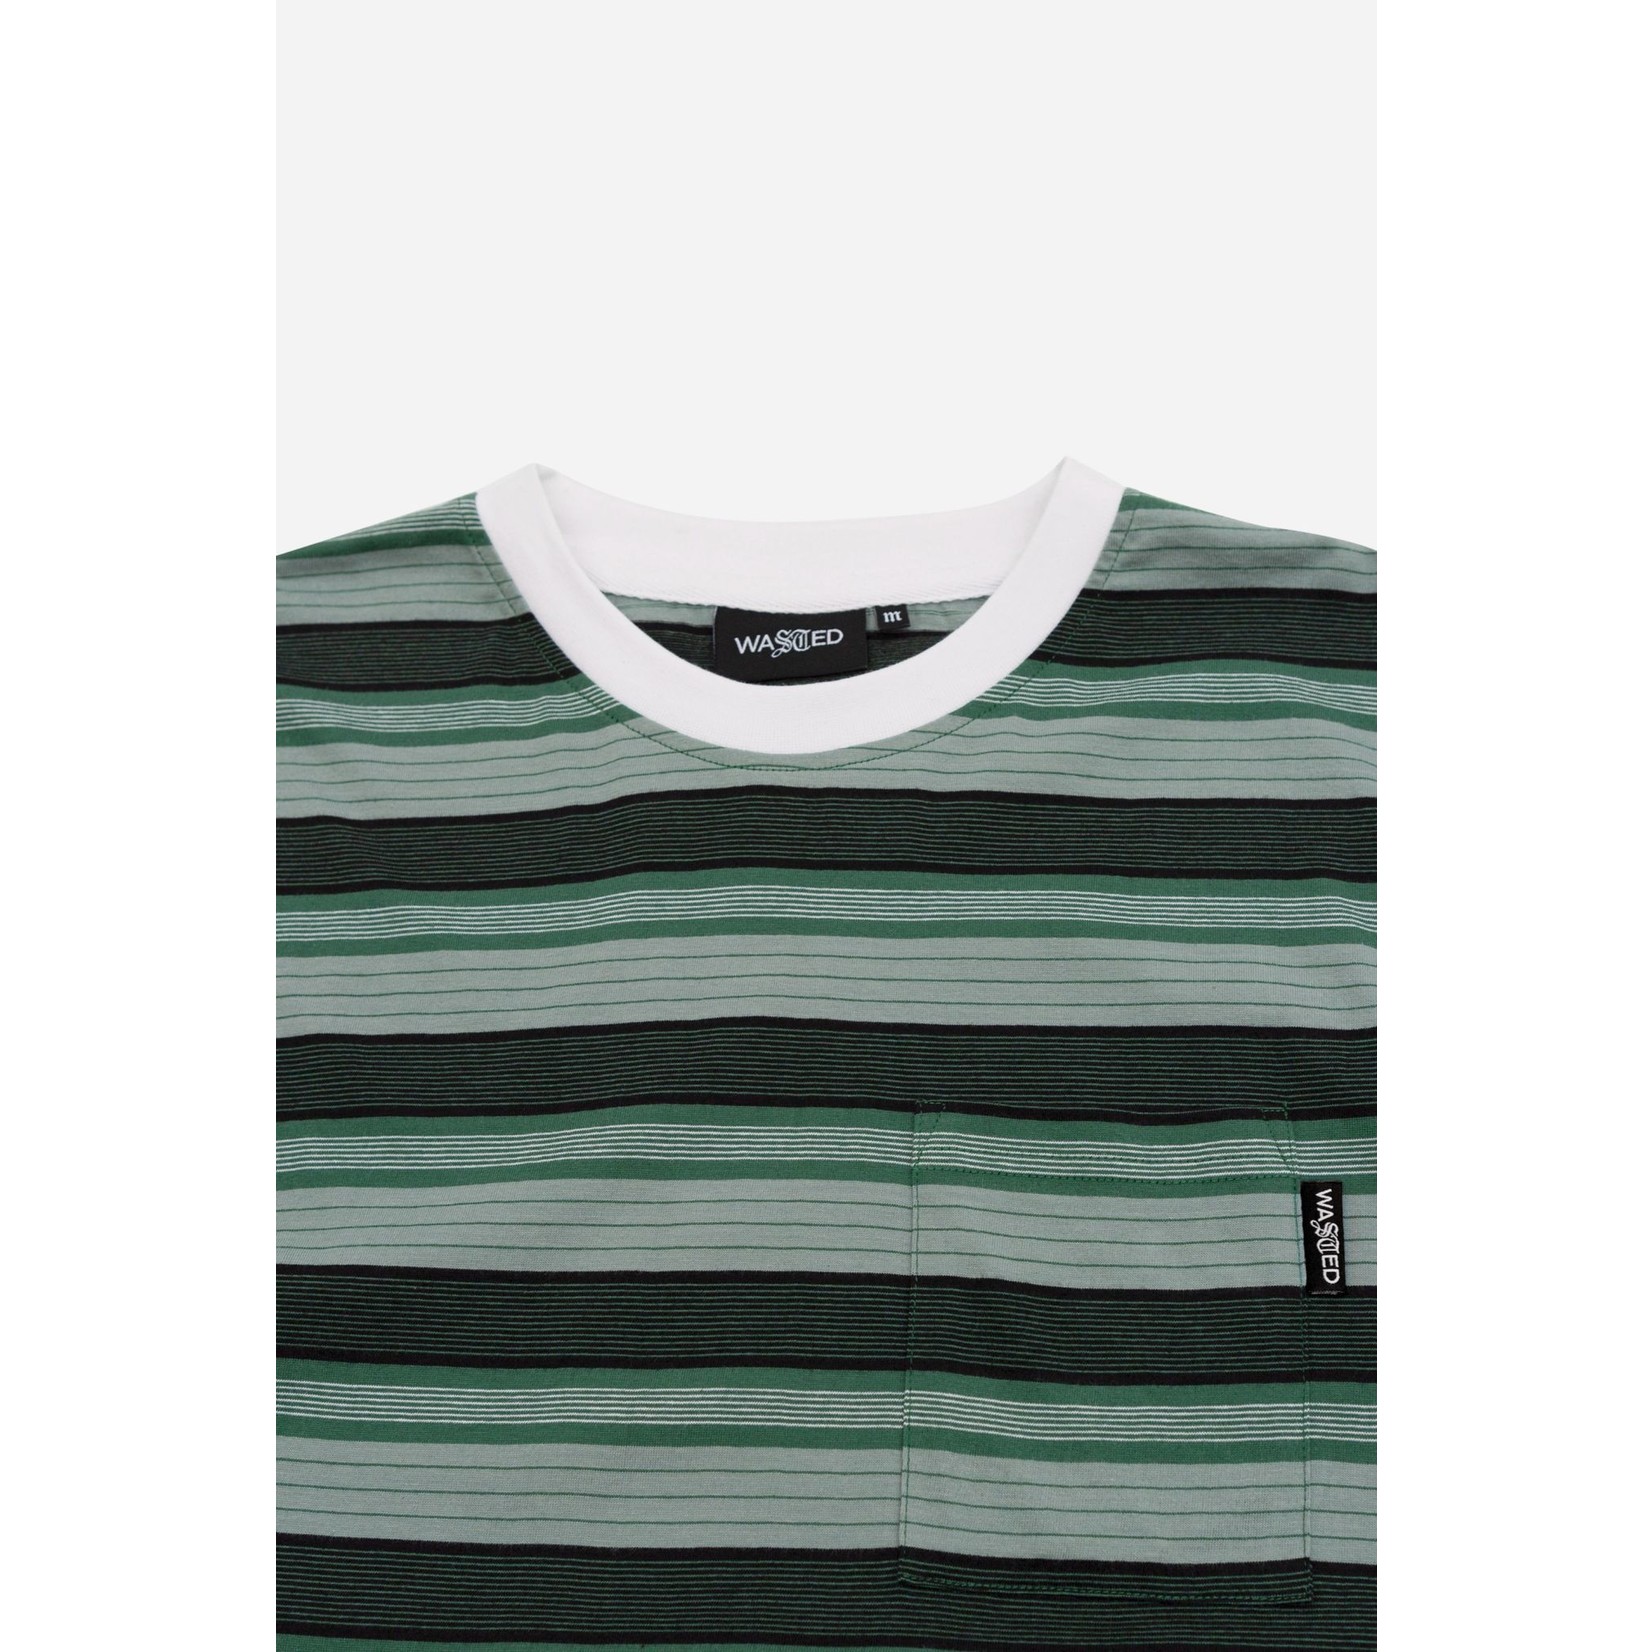 WASTED PARIS WASTED PARIS - T-AGE STRIPES - PINE GREEN/WATER GREEN/WHITE